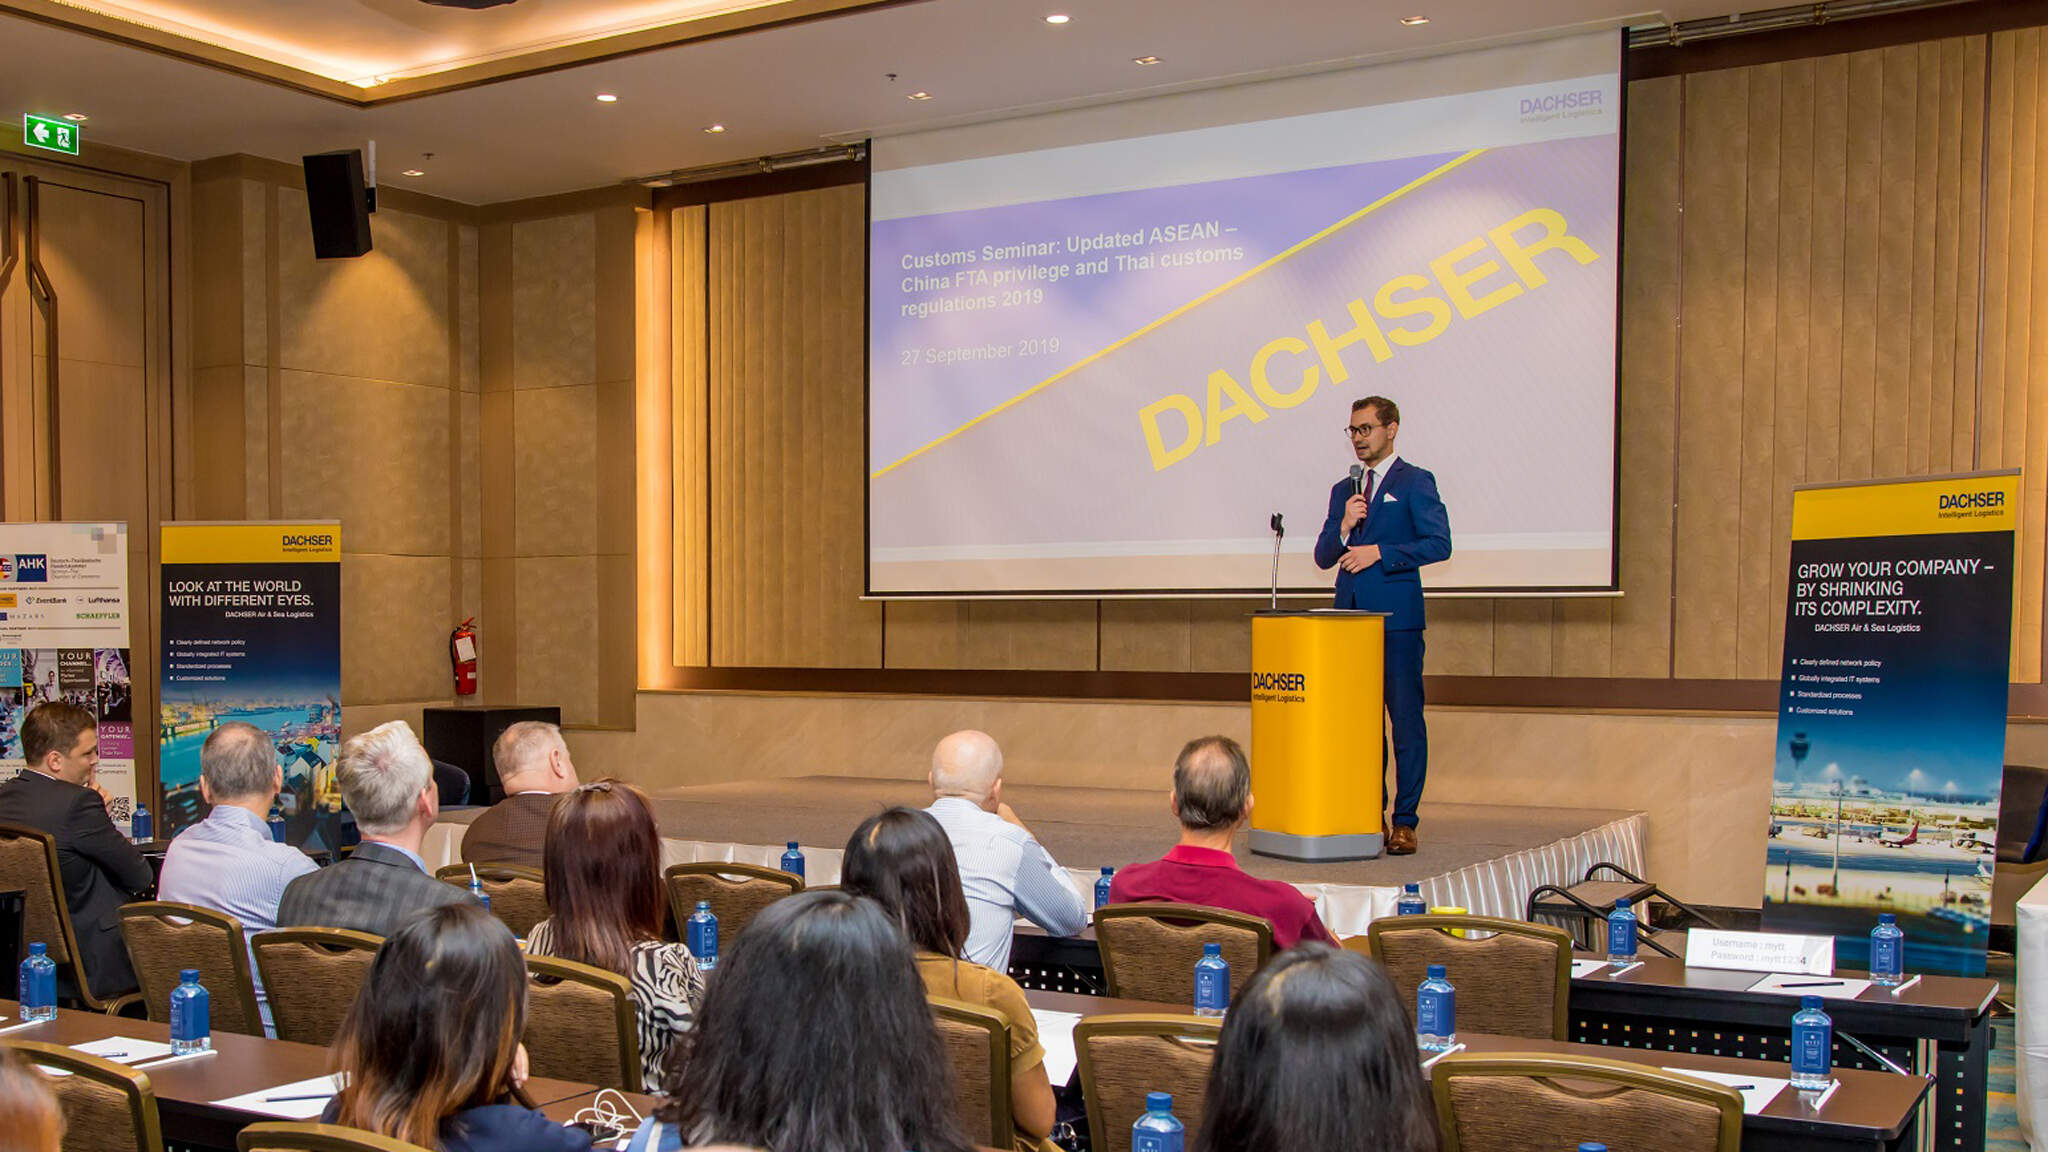 DACHSER Thailand hosted a customs clearance seminar focusing on the changes in customs clearance regulations brought by the upgraded ASEAN-China Free Trade Area.